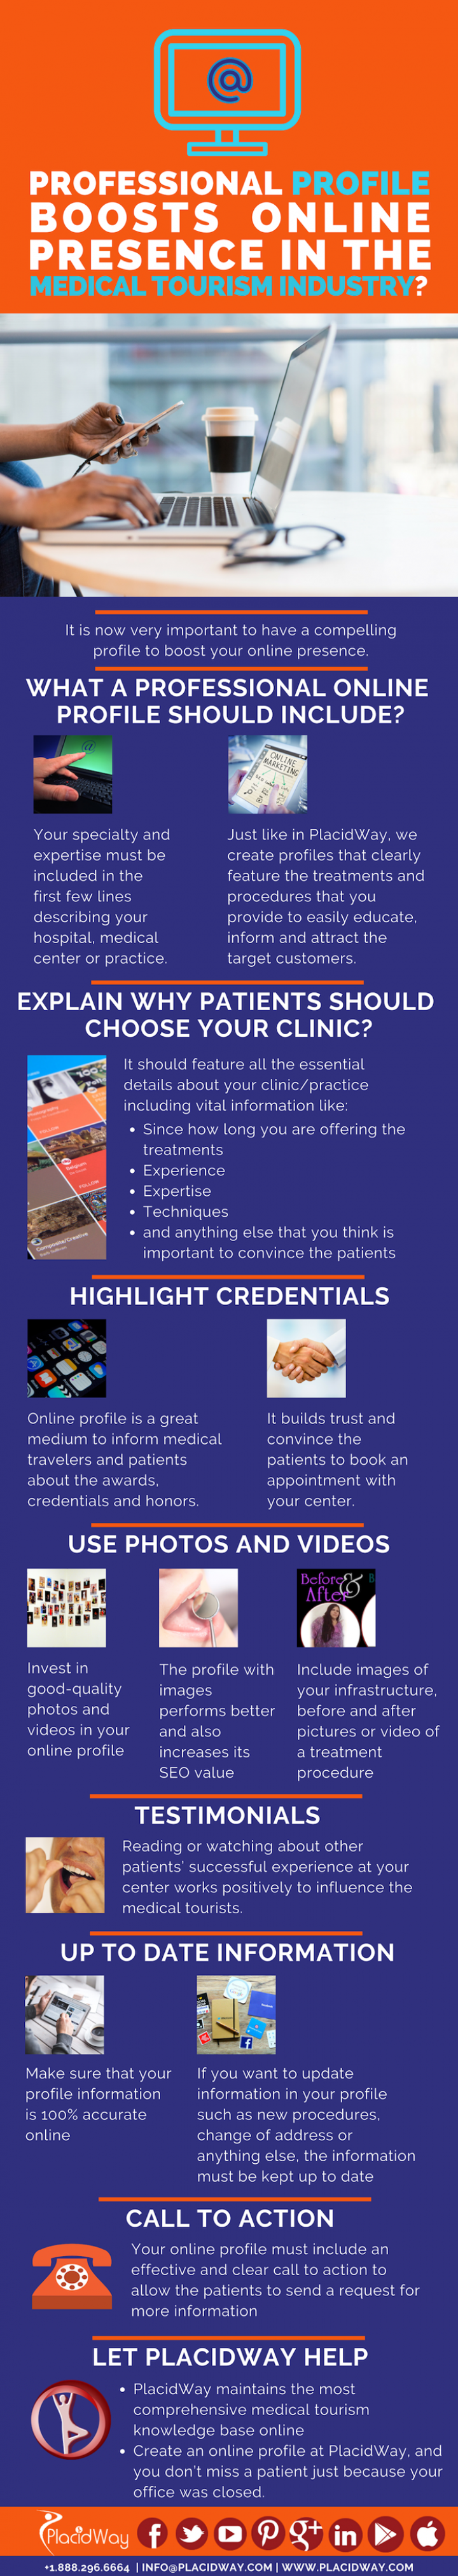 Infographics: Professional Profile Boosts Online Presence in the Medical Tourism Industry?